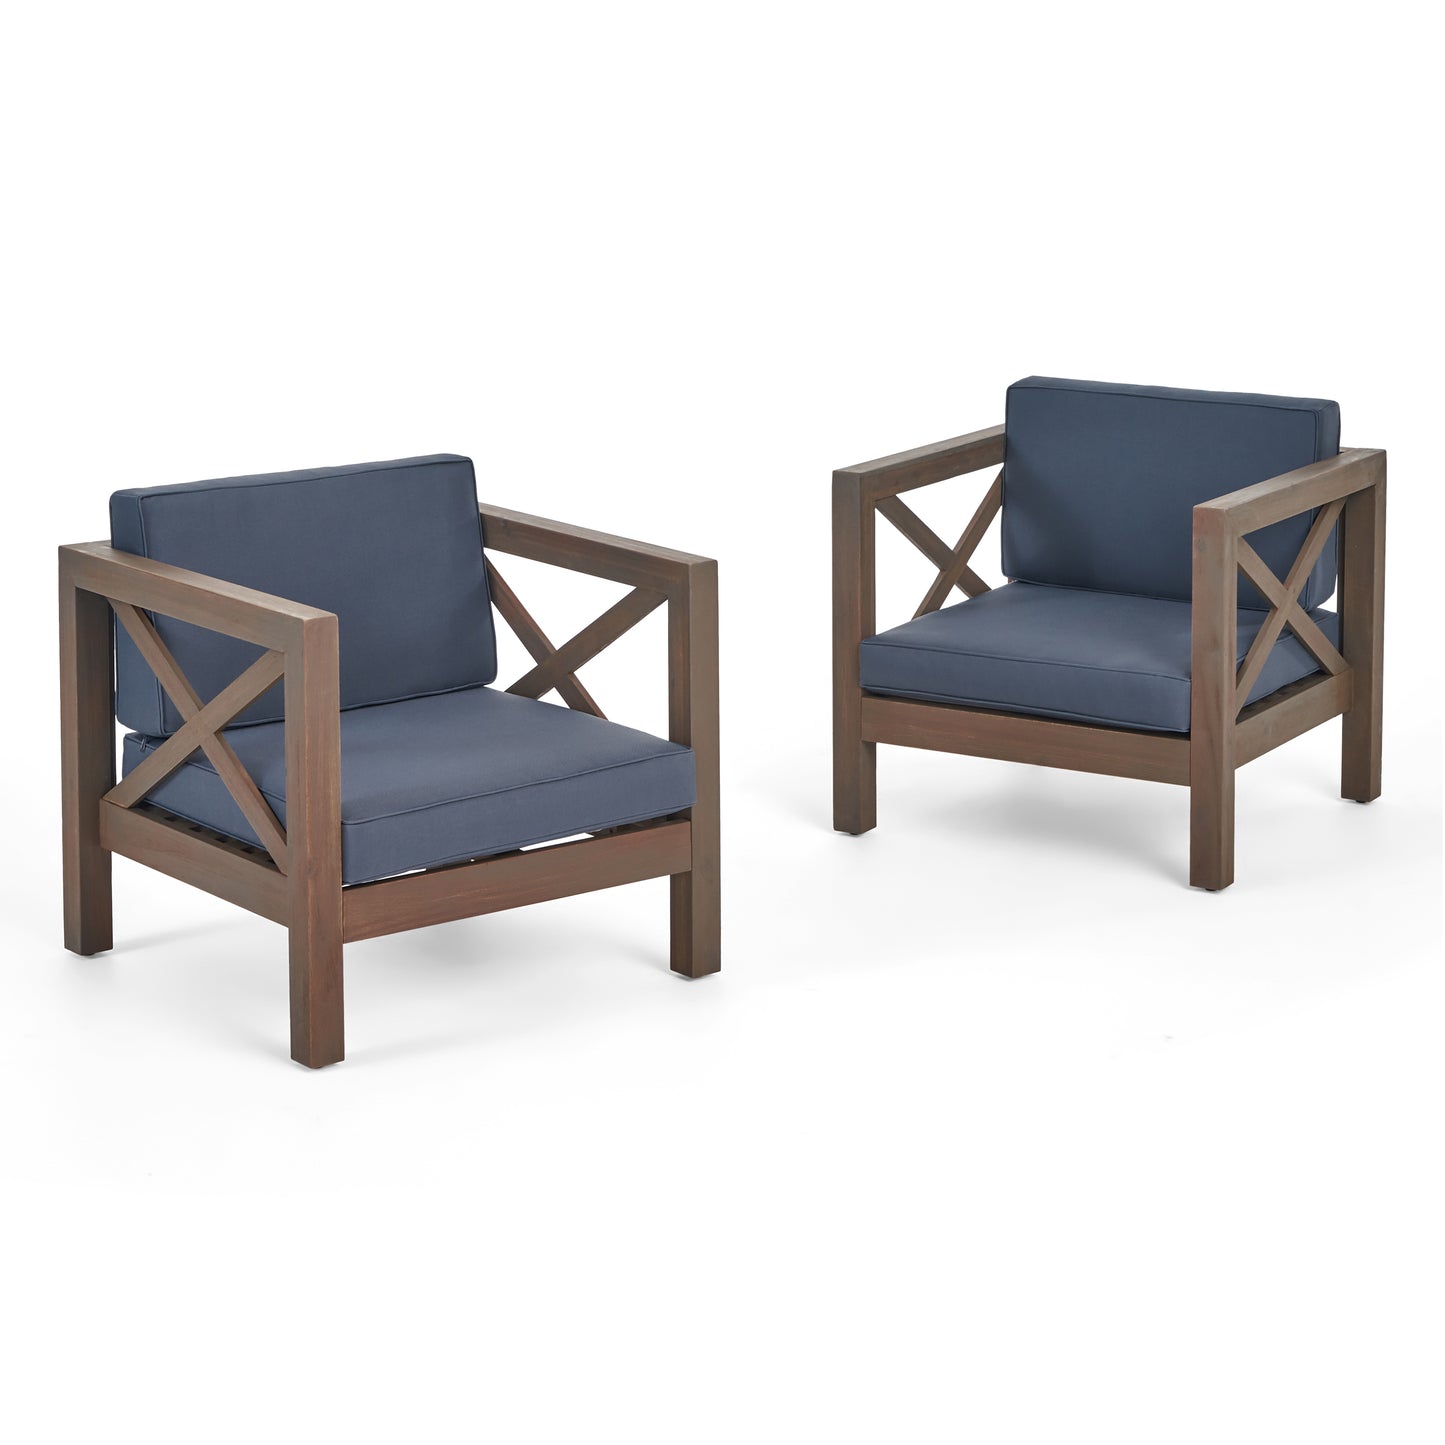 Indira Outdoor Acacia Wood Club Chairs with Cushions (Set of 2)